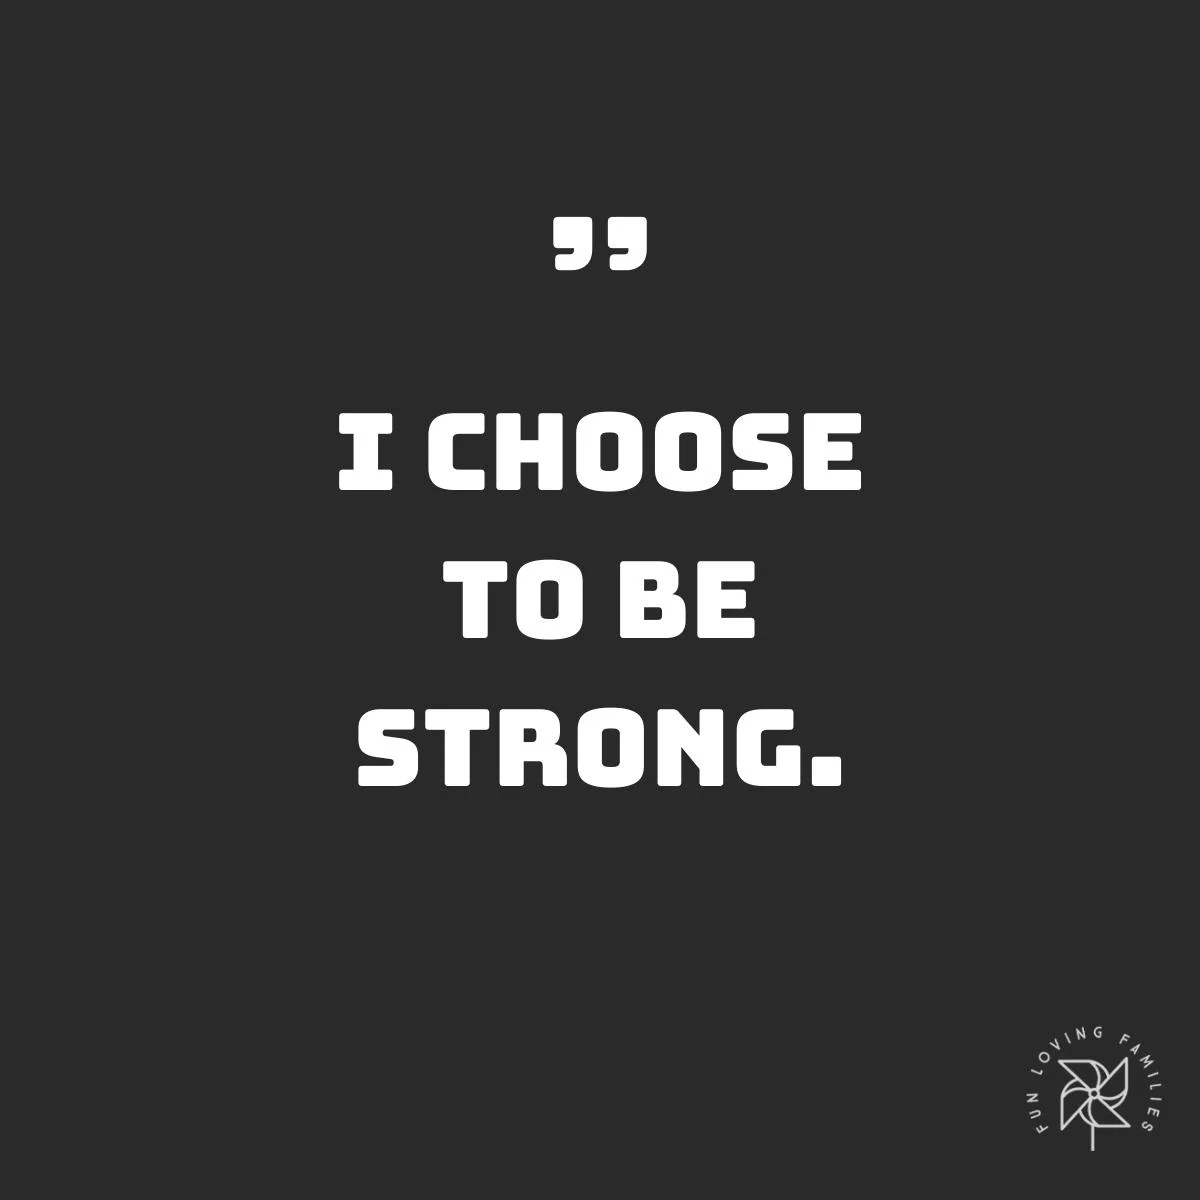 I choose to be strong